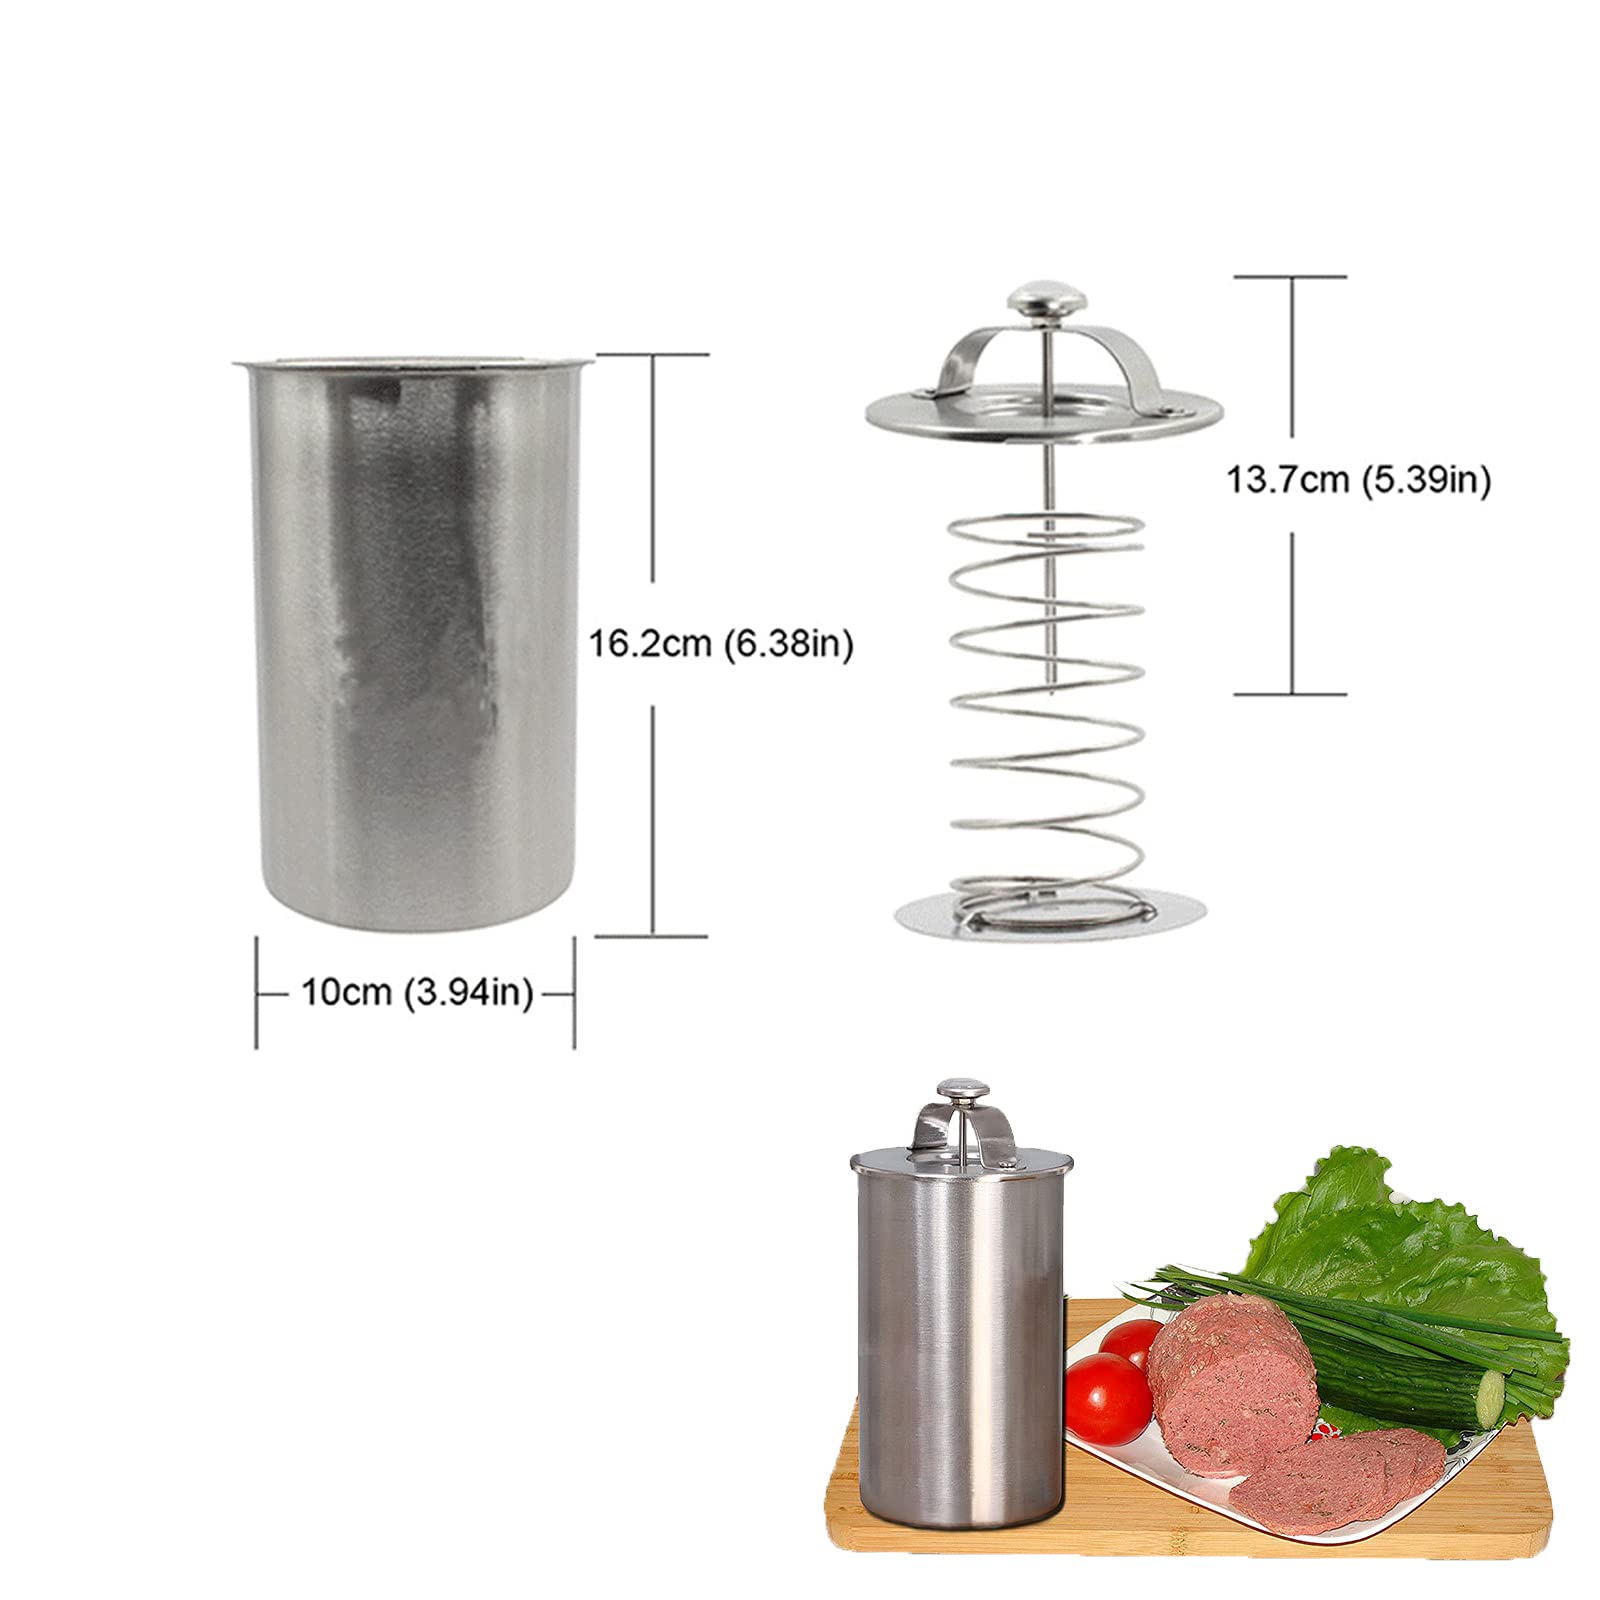 Press Ham Maker - Joyeee Round Shape Stainless Steel Ham Press Maker Machine for Making Healthy Homemade Deli Meat Sandwich, Seafood Meat Poultry Patty Gourmet Cooking Tools